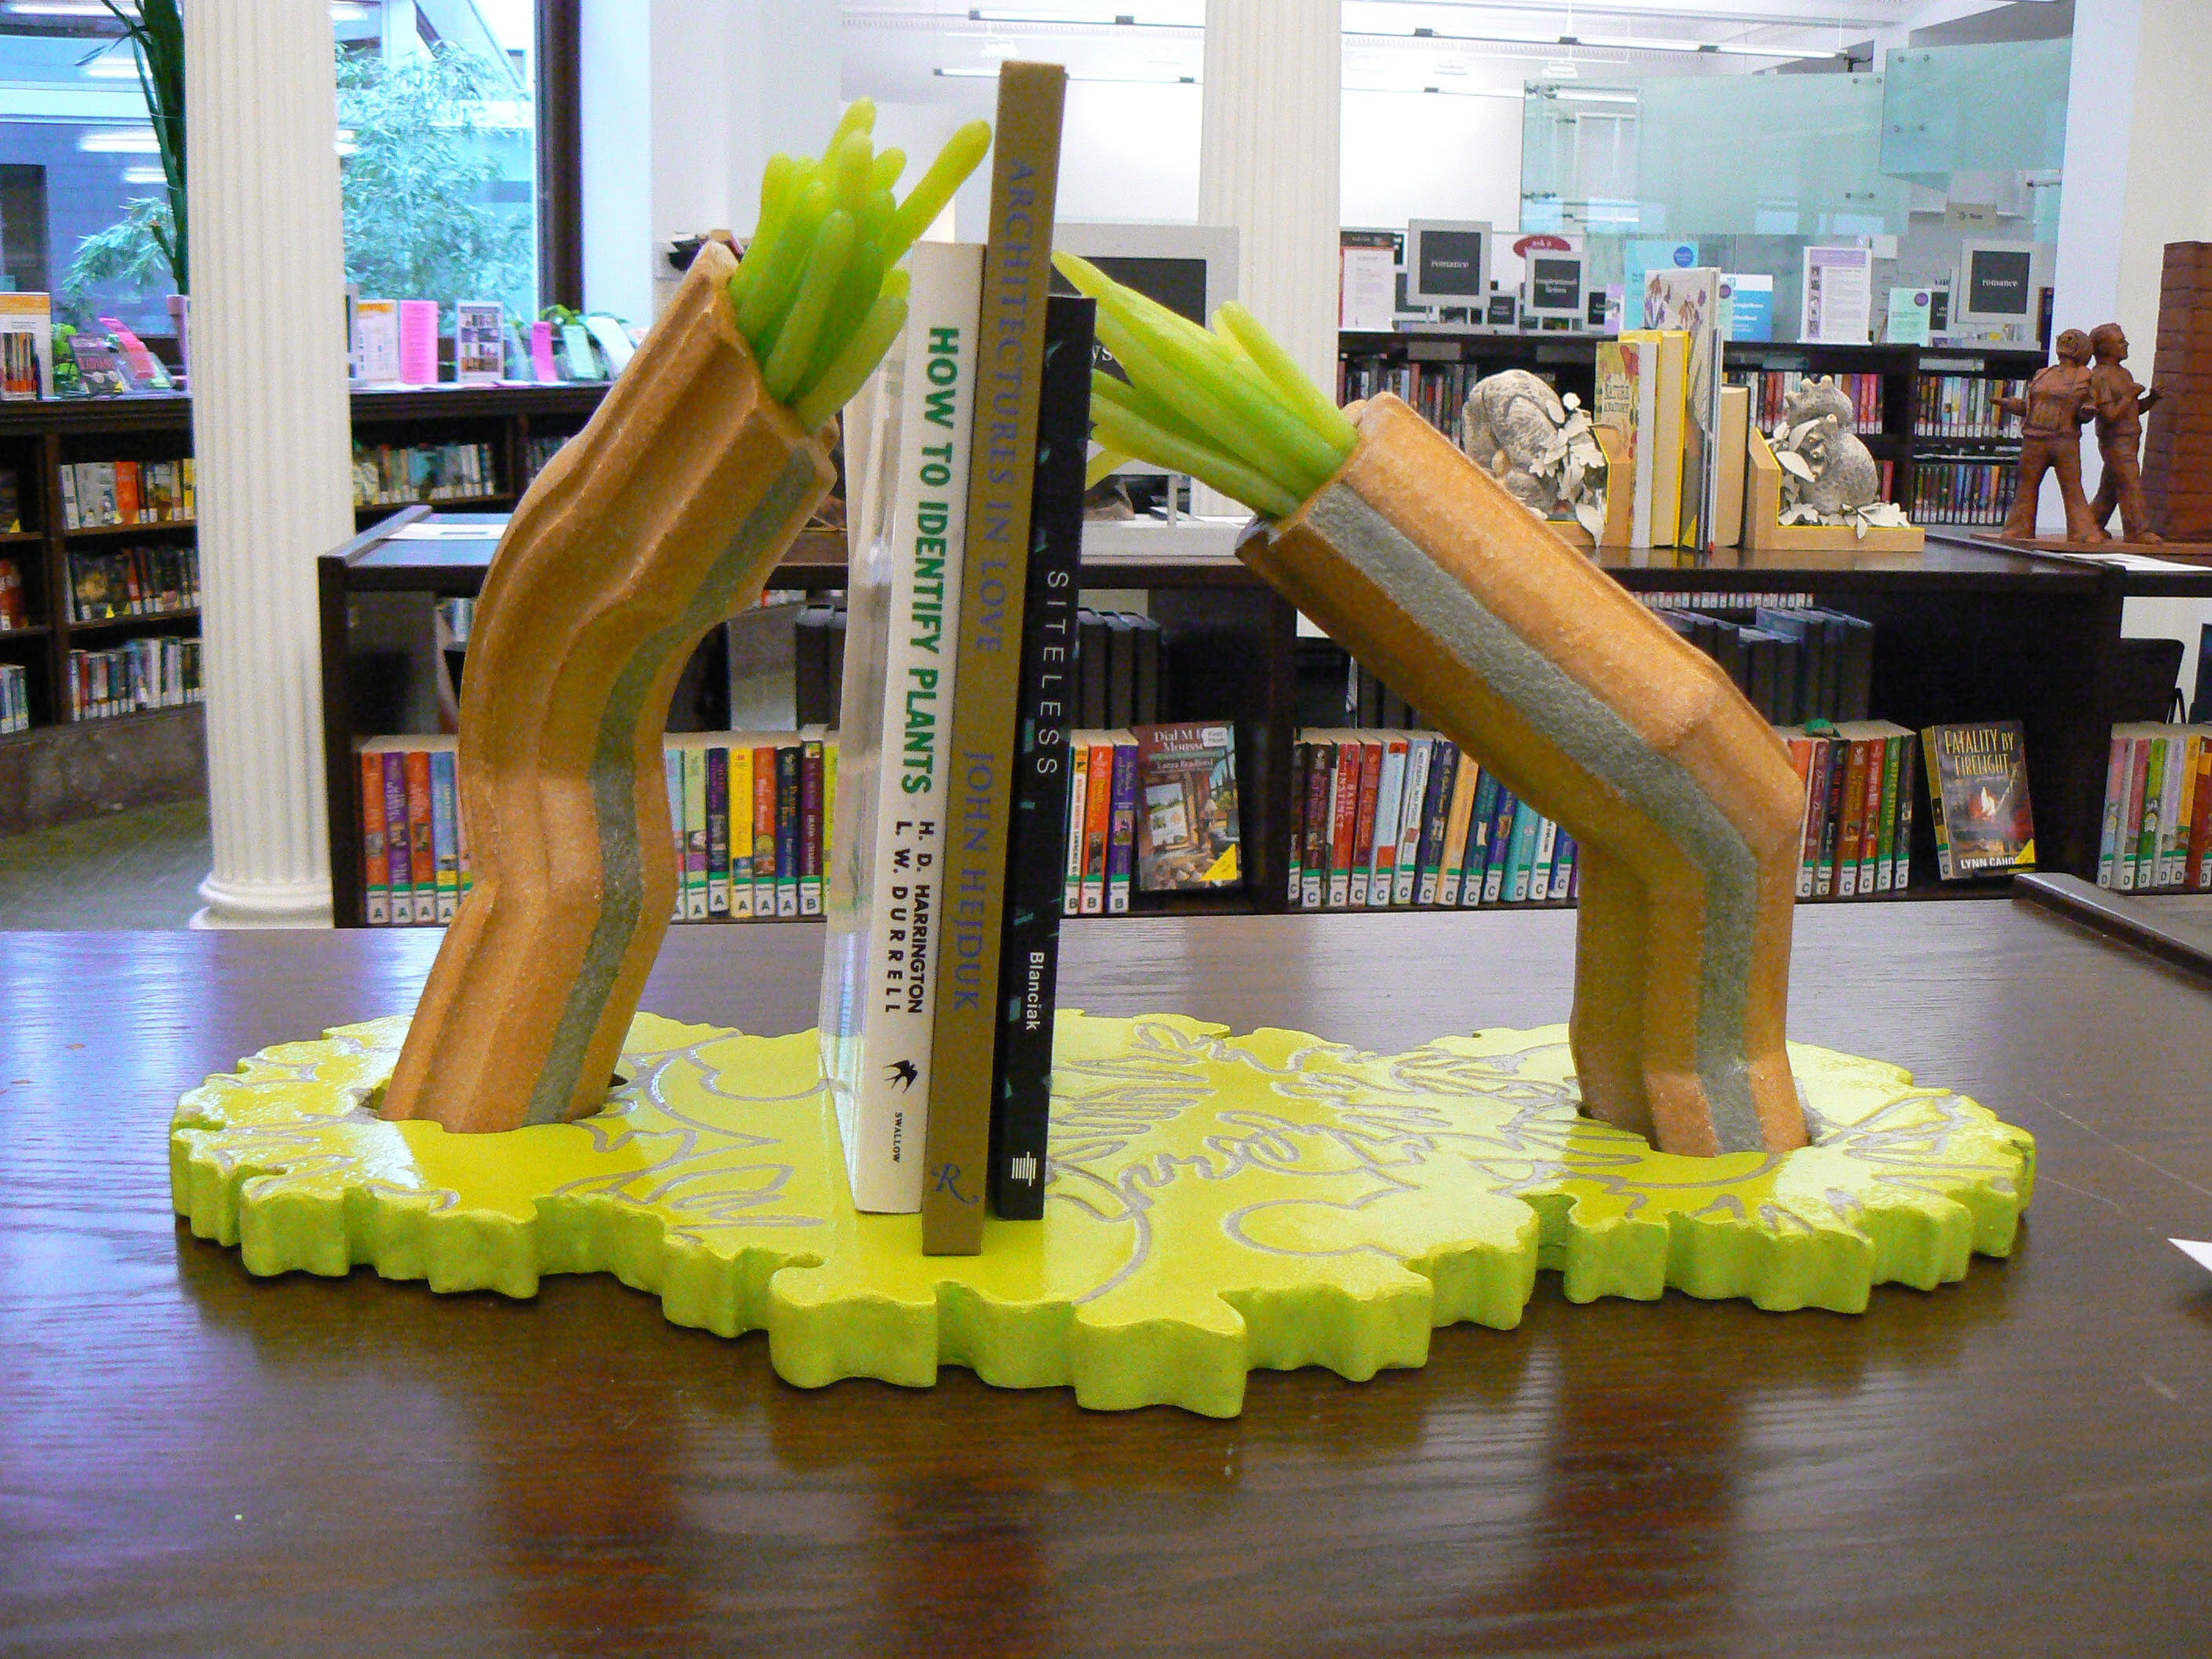 Ceramic bookends that appear inspired by the look of sea anemone.